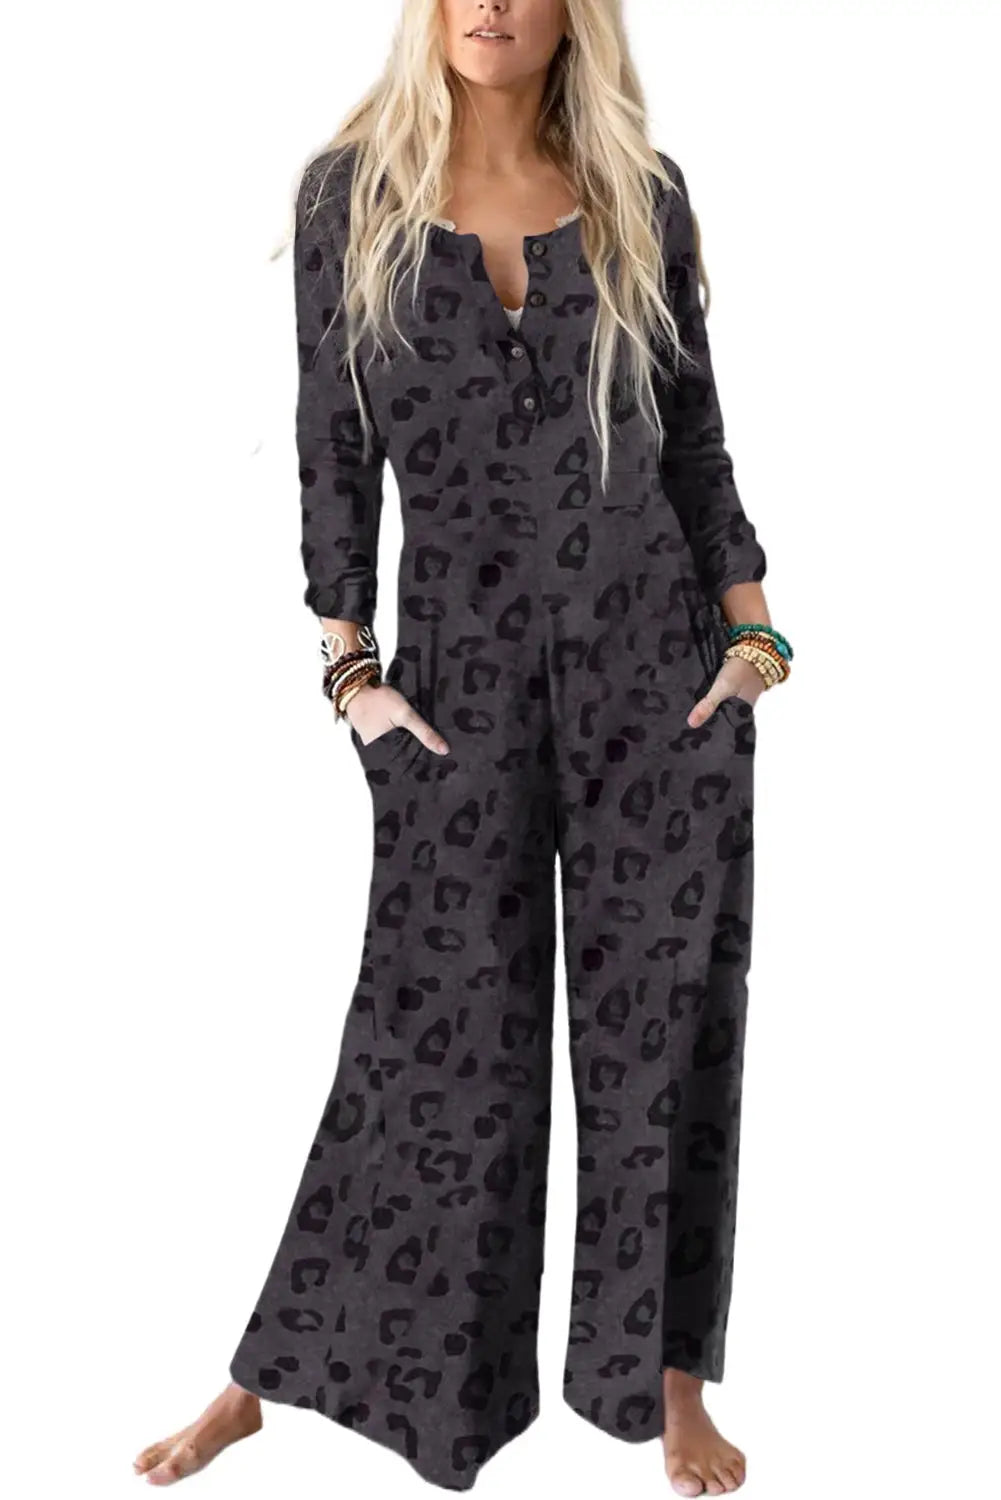 Gray printed buttoned bodice wide leg leopard jumpsuit - bottoms